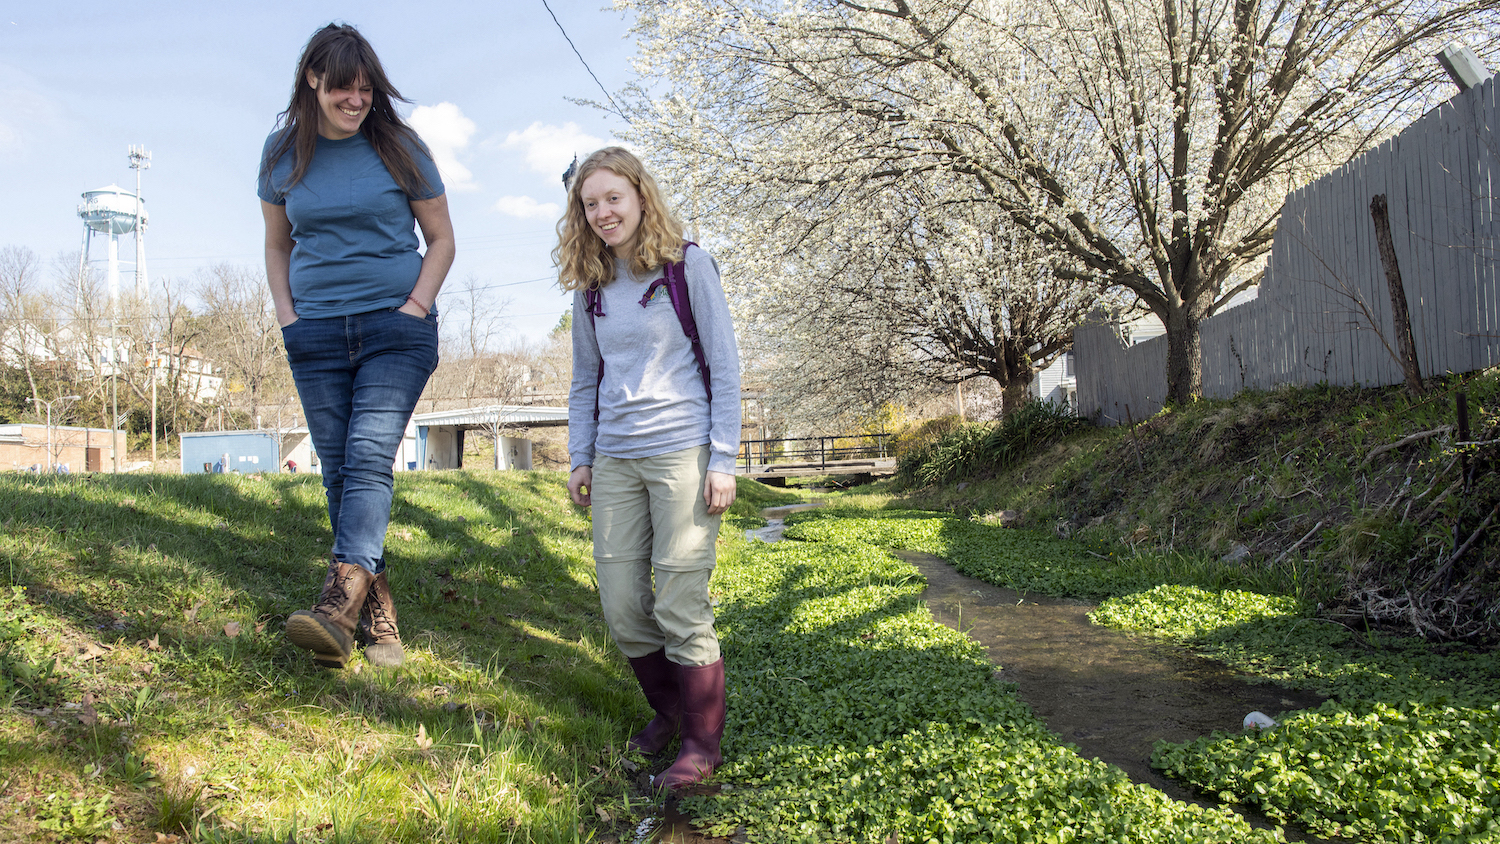 Julia Sargent and Maggie Walker walk side-by-side on the grass near a stream near a town road.